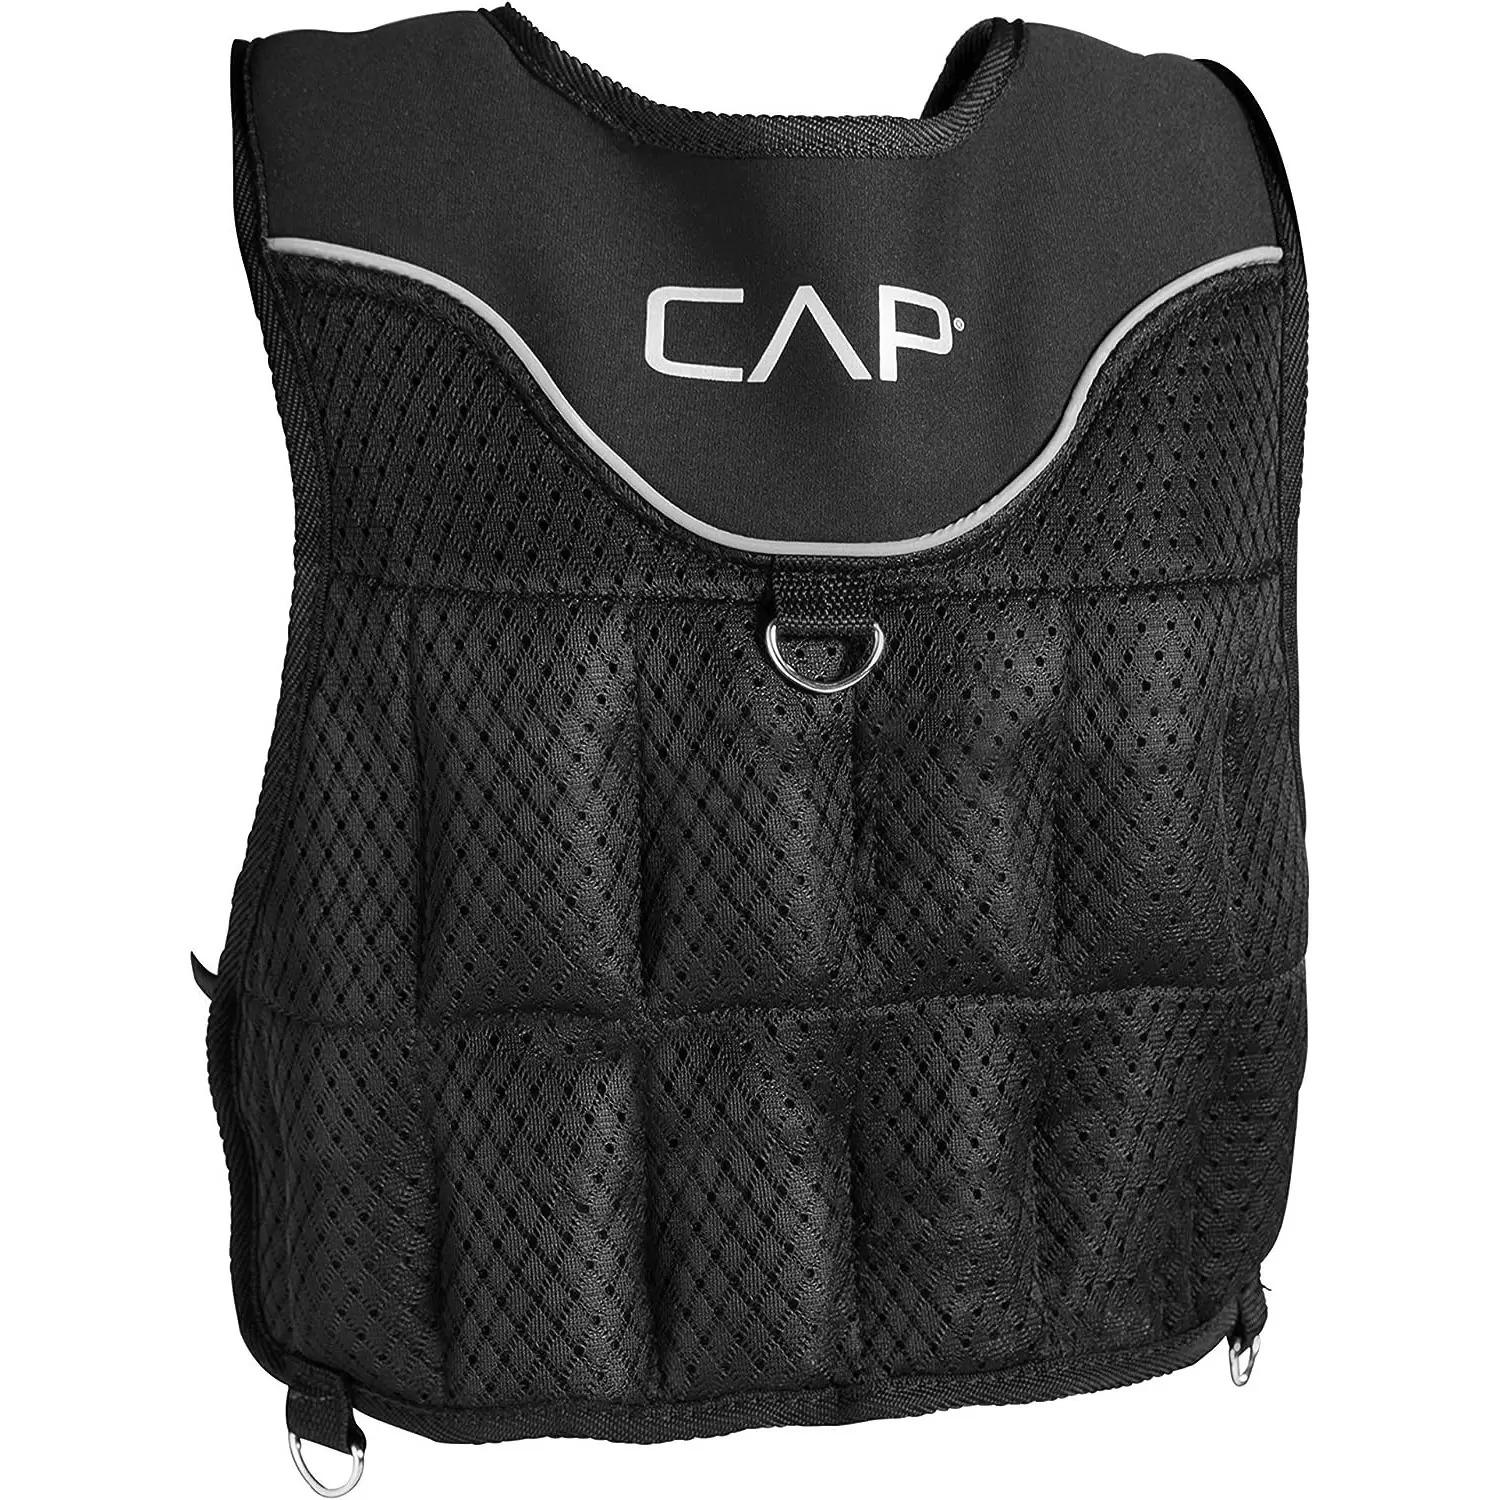 CAP Barbell Adjustable Weighted Vest for $19.99